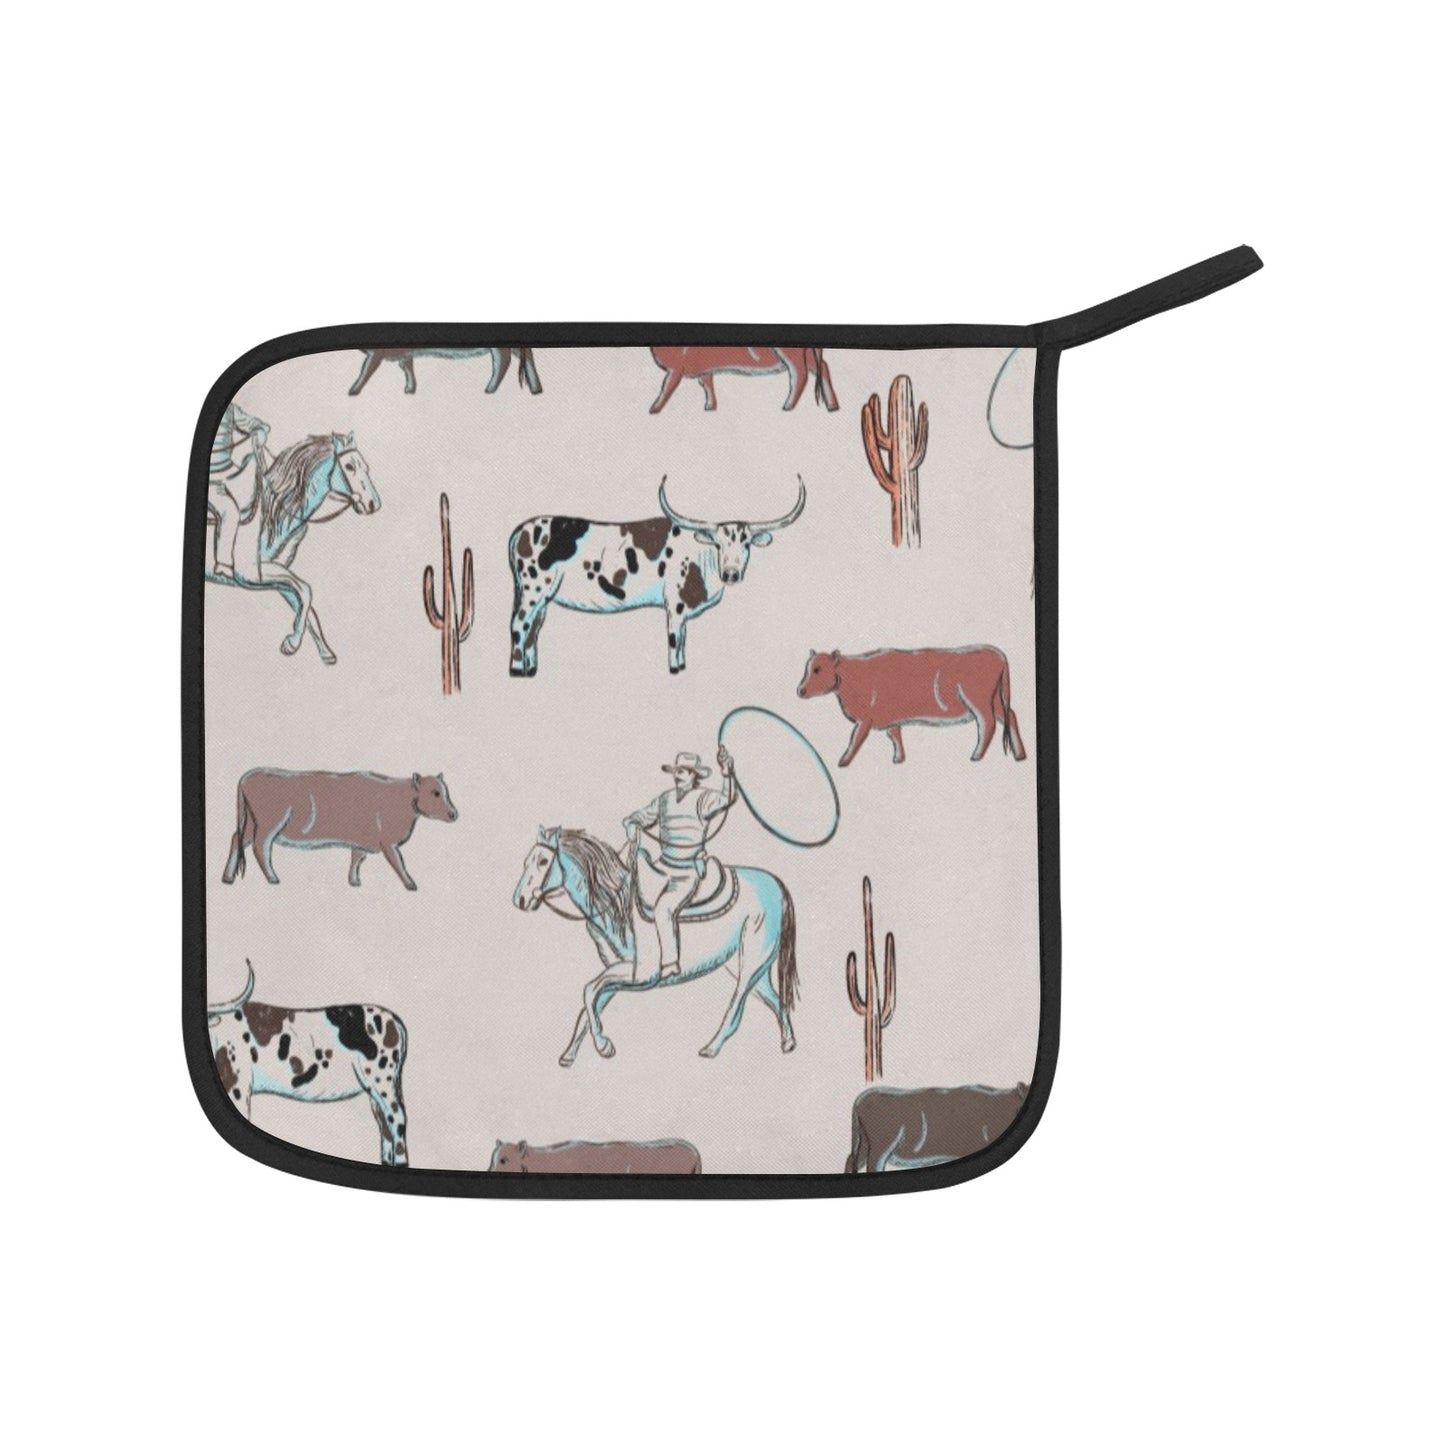 Cattle Drive Set of 2 Pot Holders